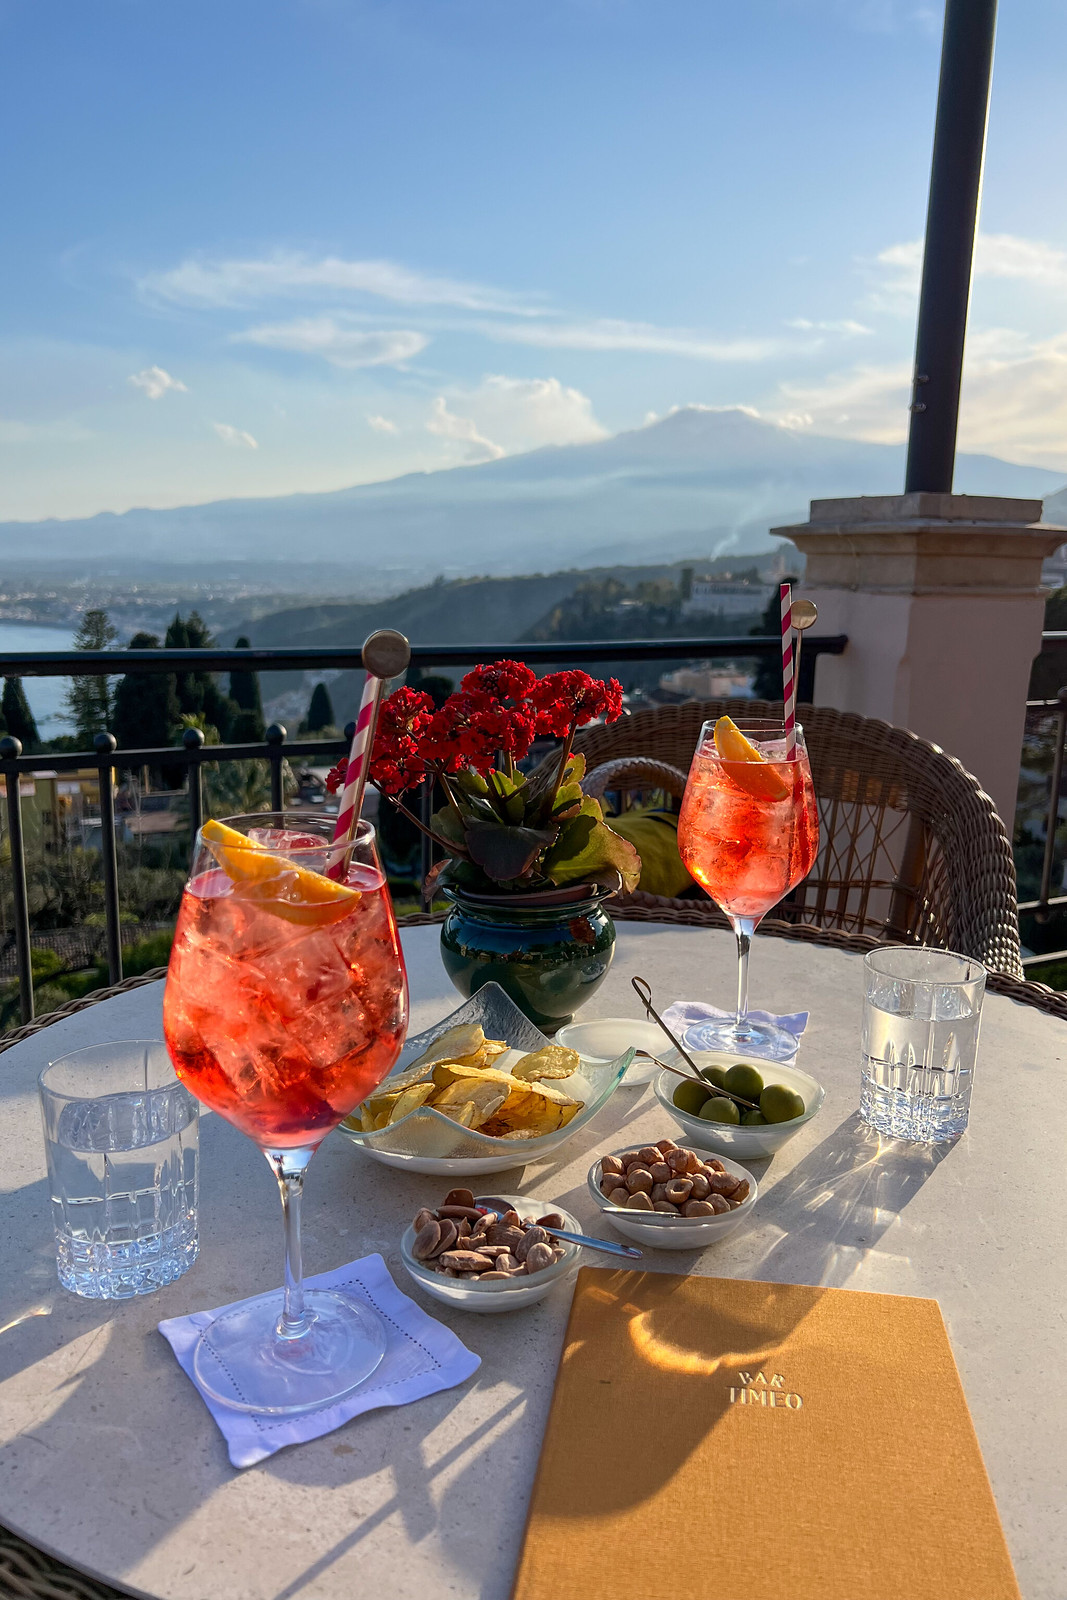 Aperitivo at Bar Timeo at the Belmond Grand Hotel Timeo | Taormina, Sicily Travel Guide | What to See, Do and Eat in Taormina | Discover the Best Things to do in Taormina, Sicily, Italy | Visit Sicily | Sicily Food | Sicily Travel Tips | The White Lotus Sicily Hotel Guide | Sicilian White Lotus Travel Guide